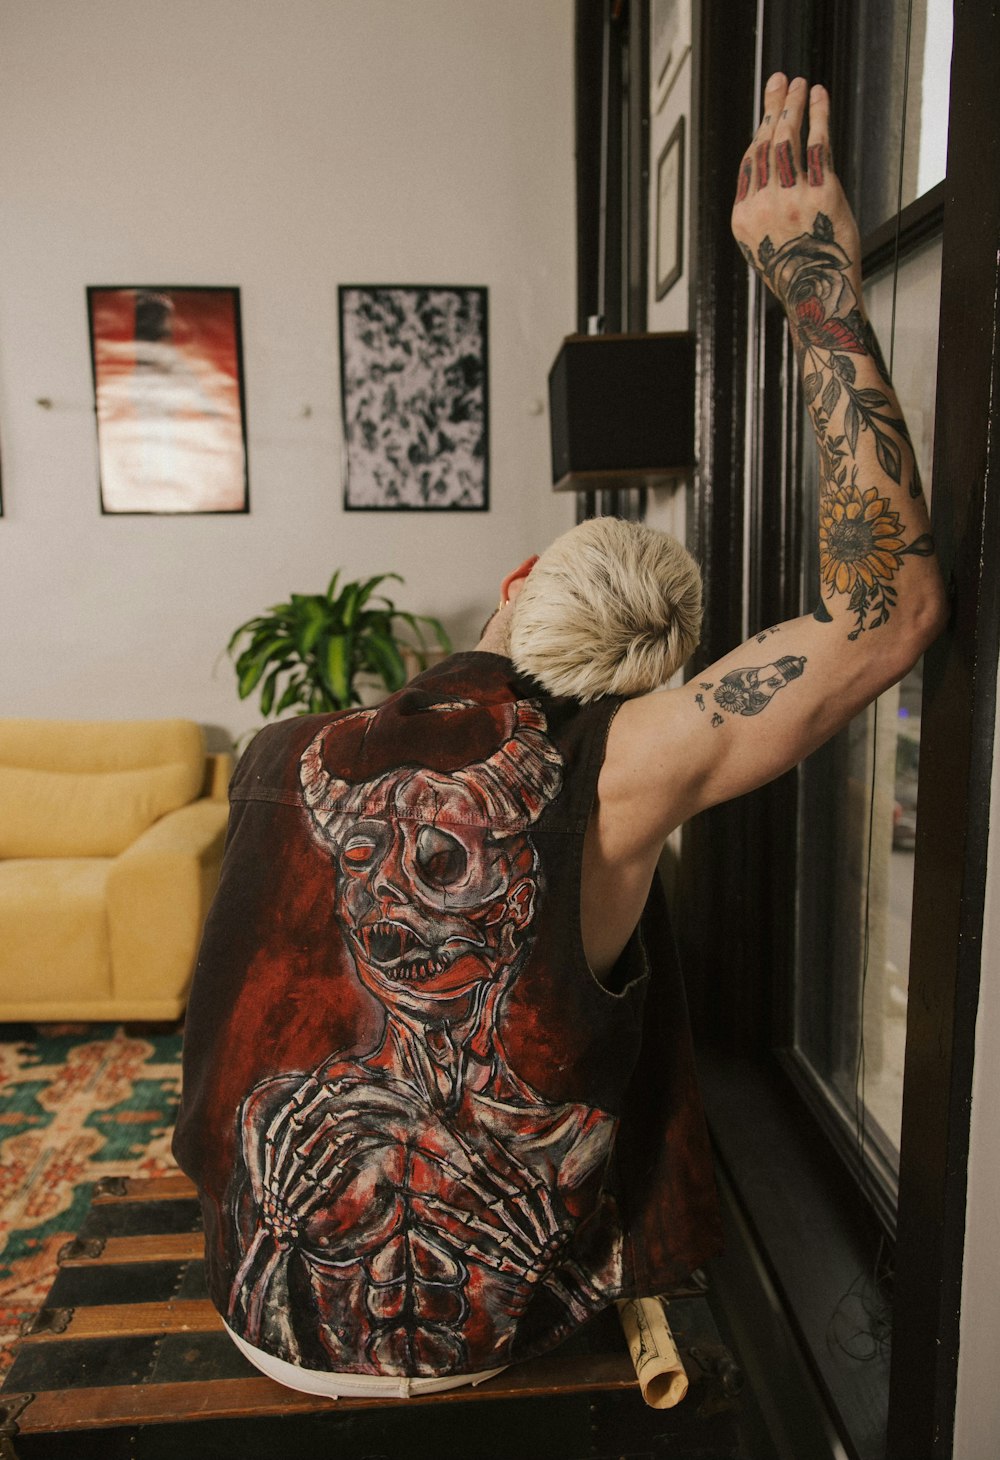 a woman with a tattoo on her arm reaching out of a window